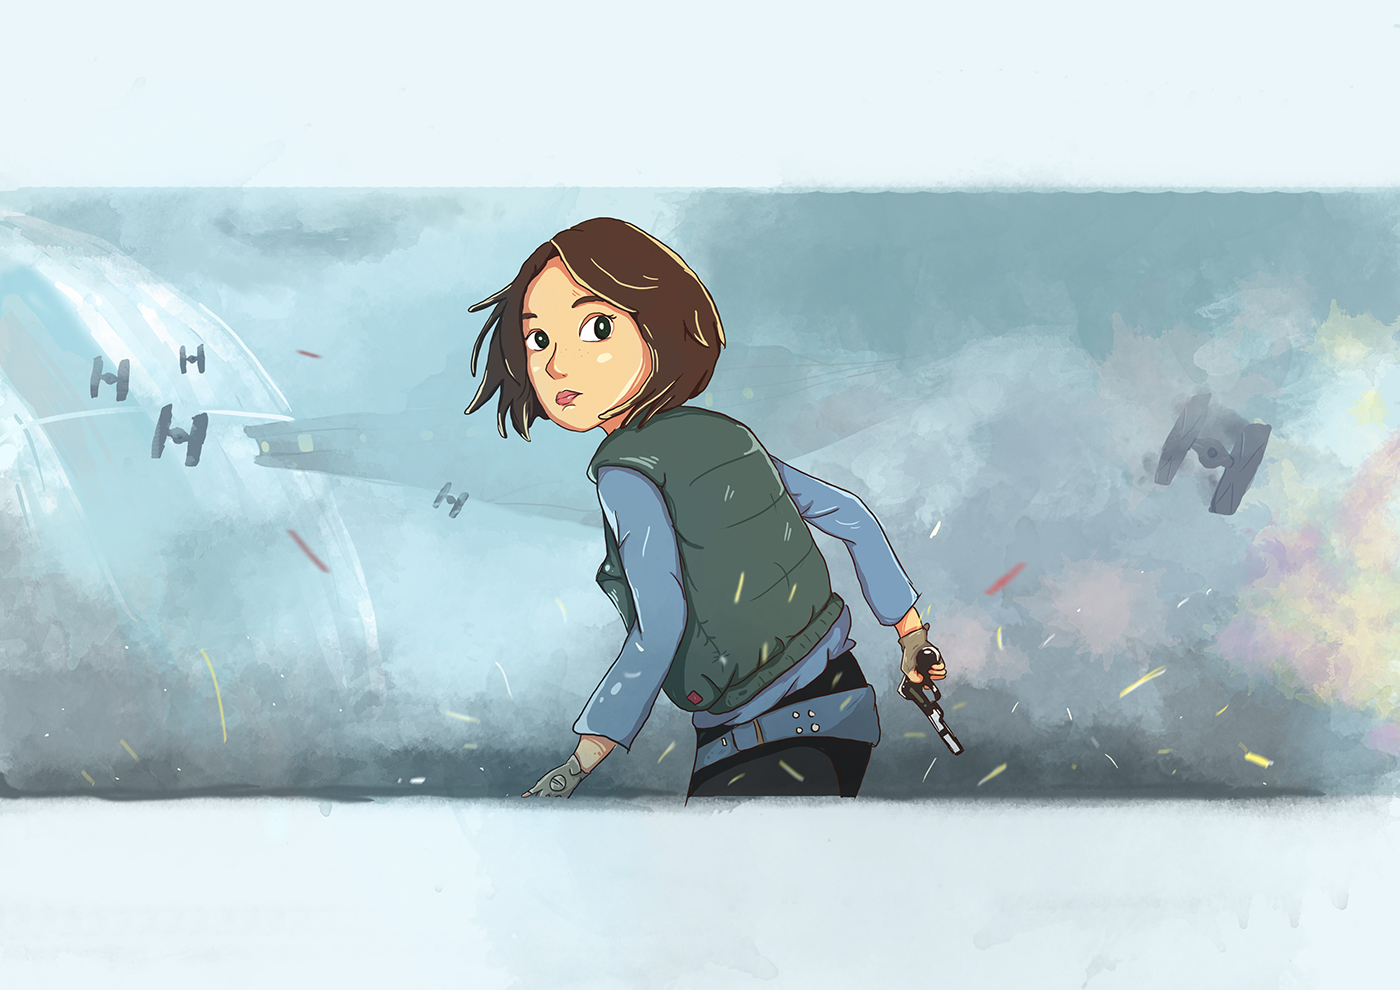 Starwars jynerso ILLUSTRATION  Character rogueone movie